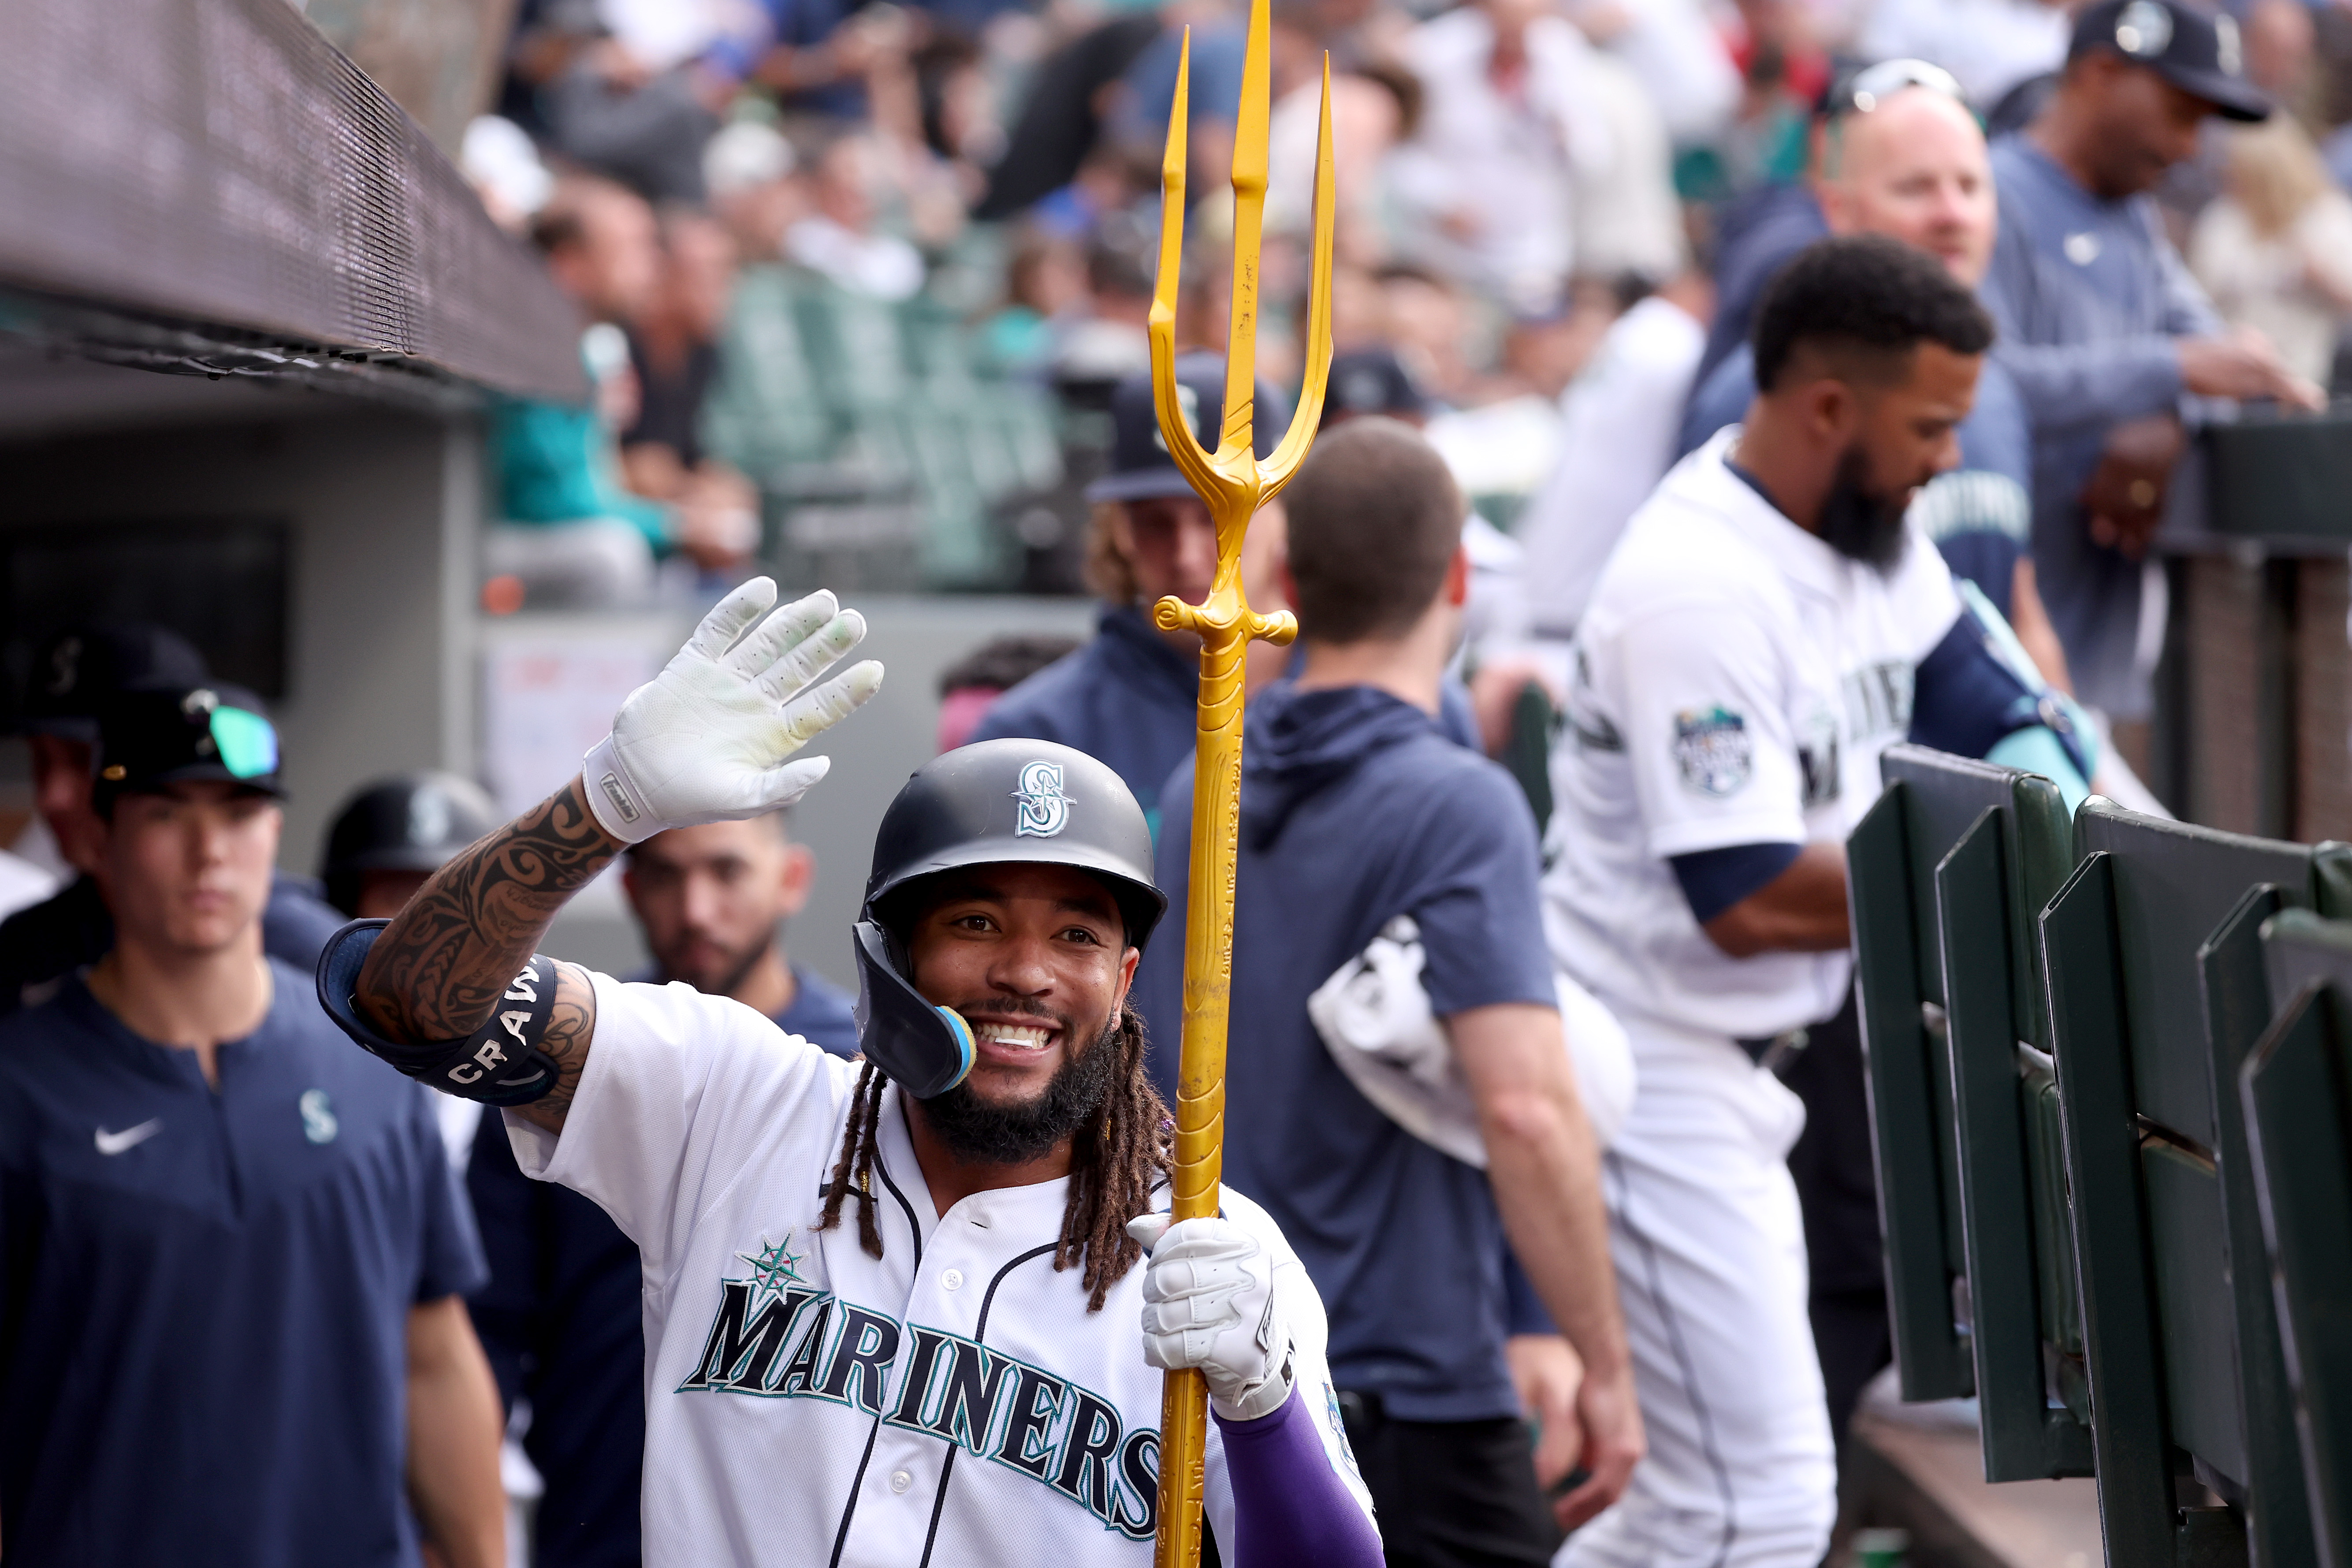 Mariners show some grit, earn comeback victory over Nats 8-4 - Lookout  Landing